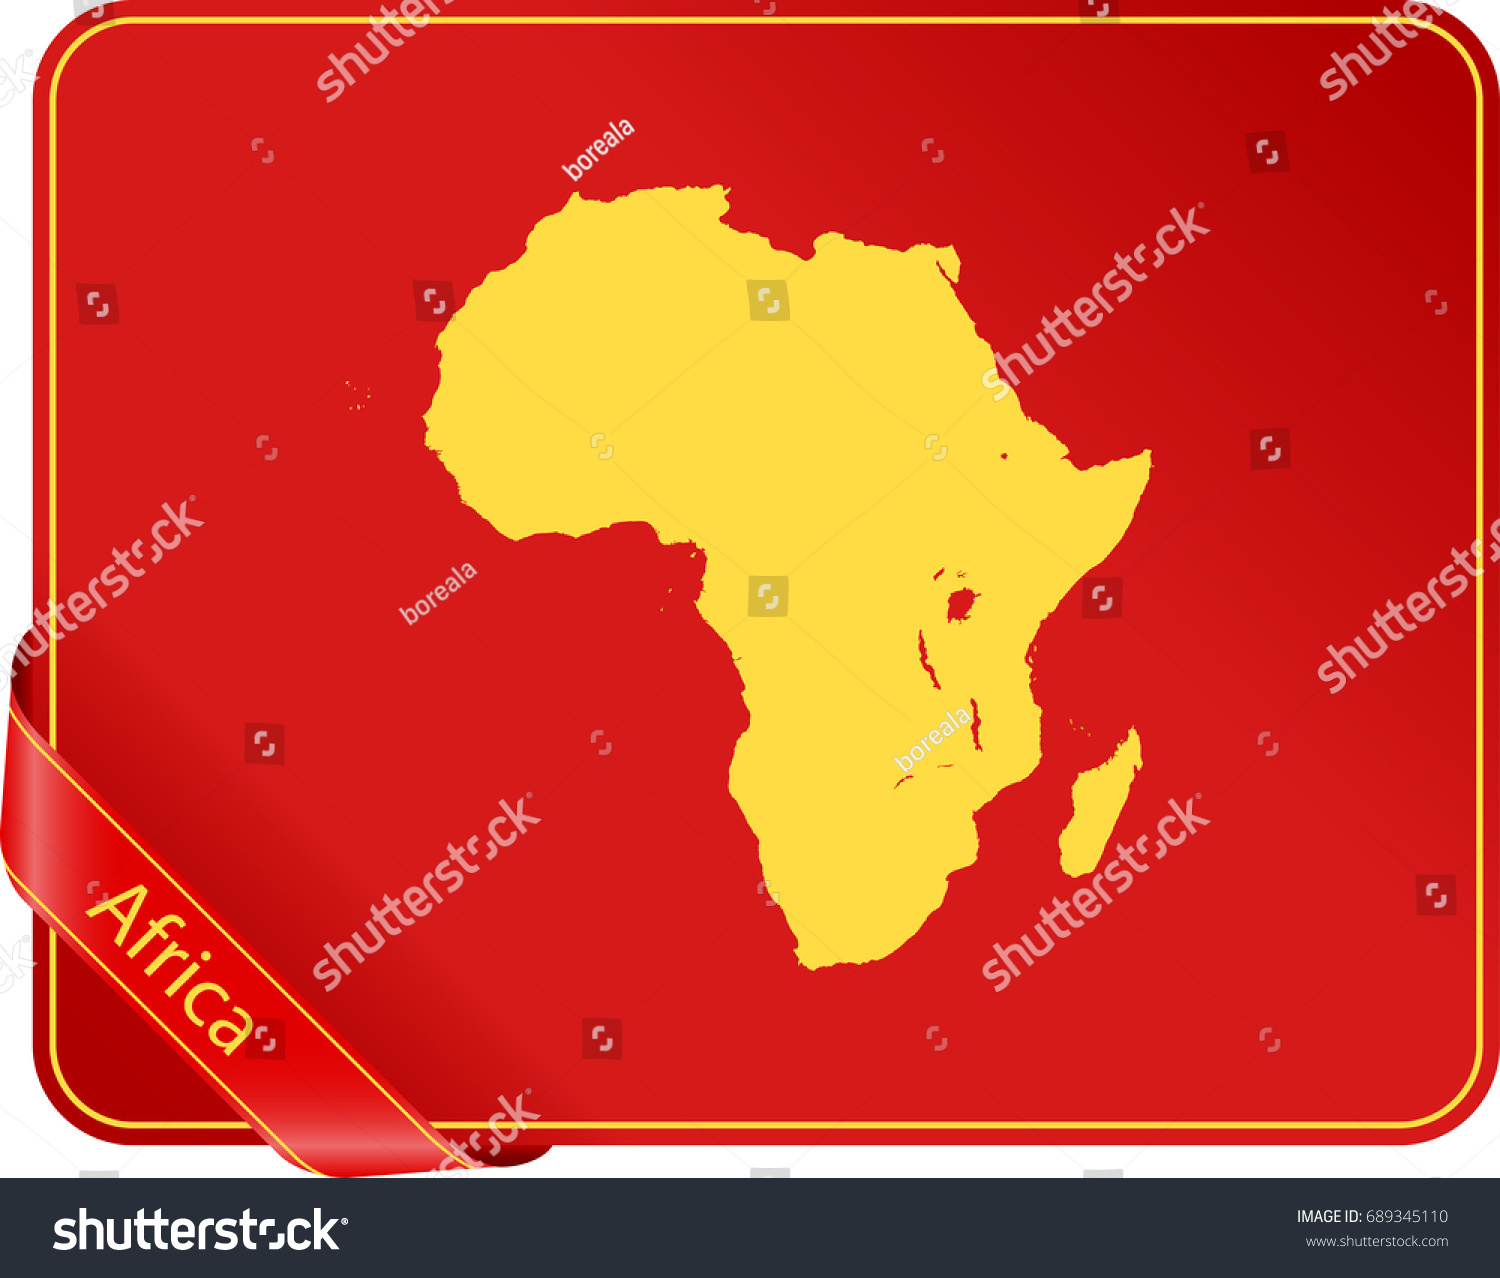 Map Of Africa Royalty Free Stock Vector 689345110 2029